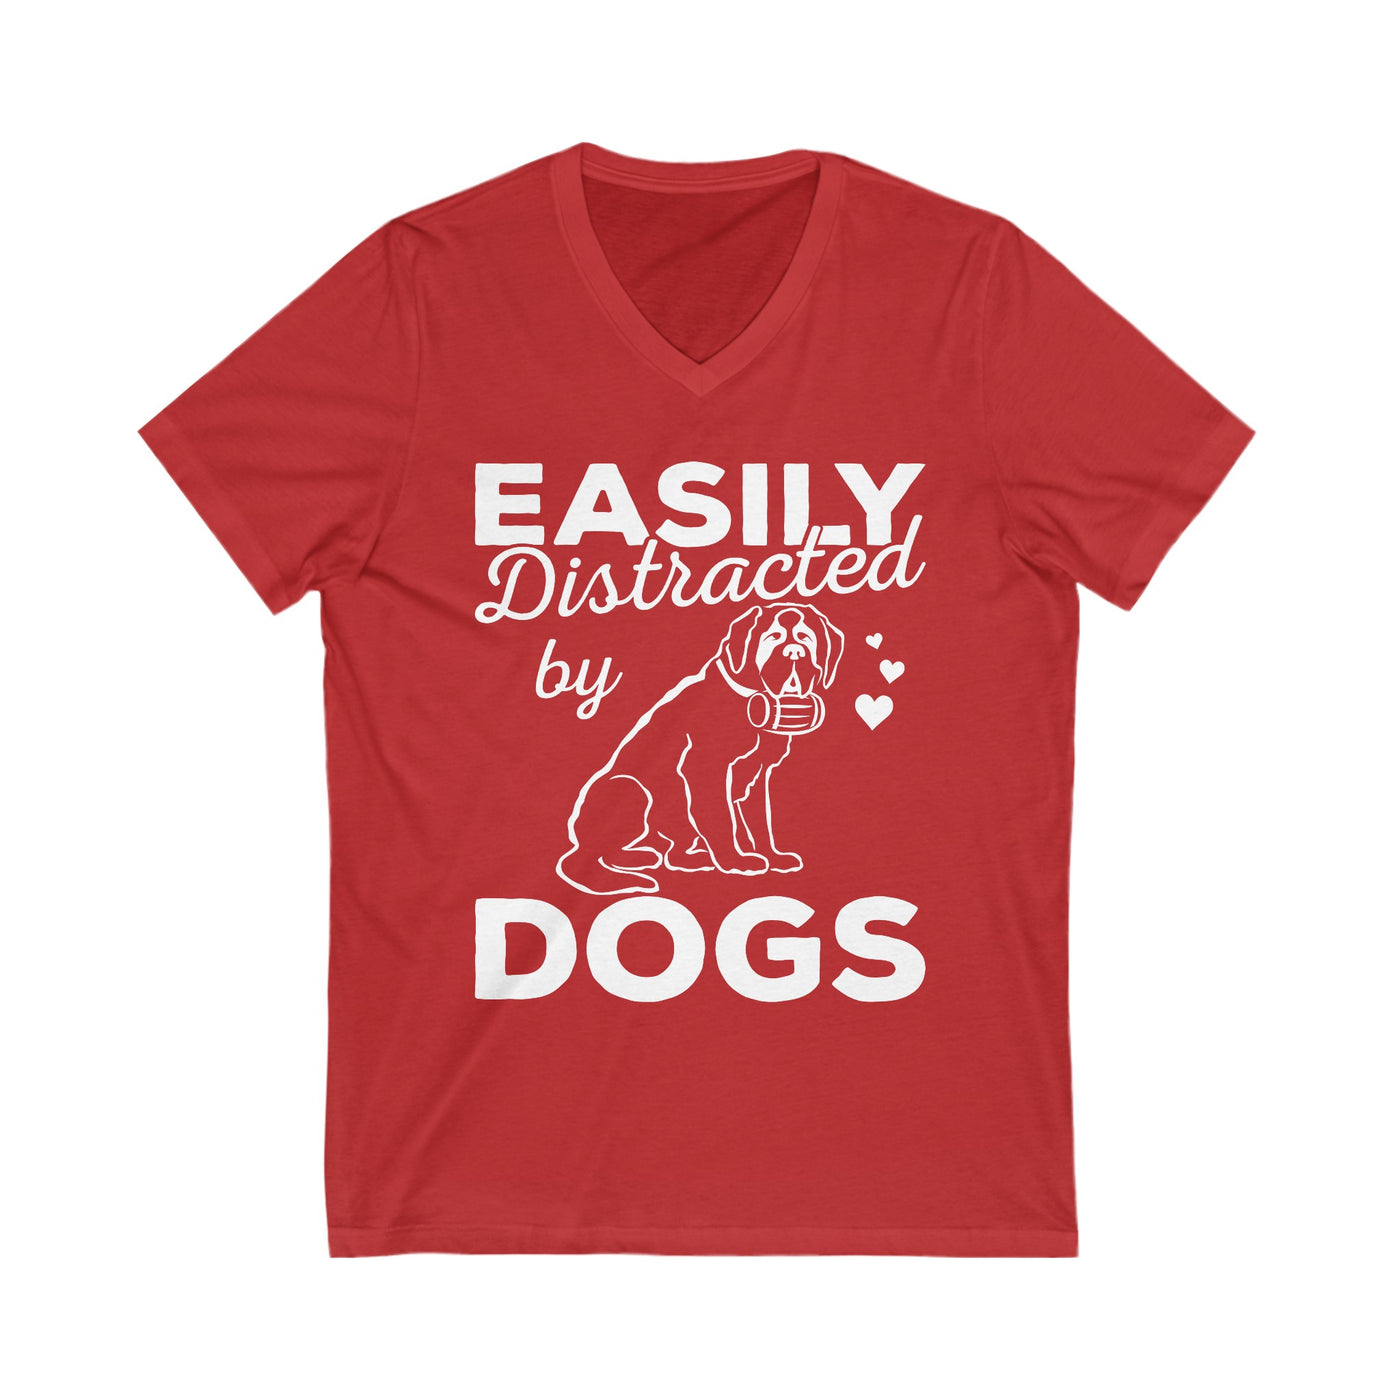 Easily Distracted By Dogs Version 1 V-Neck